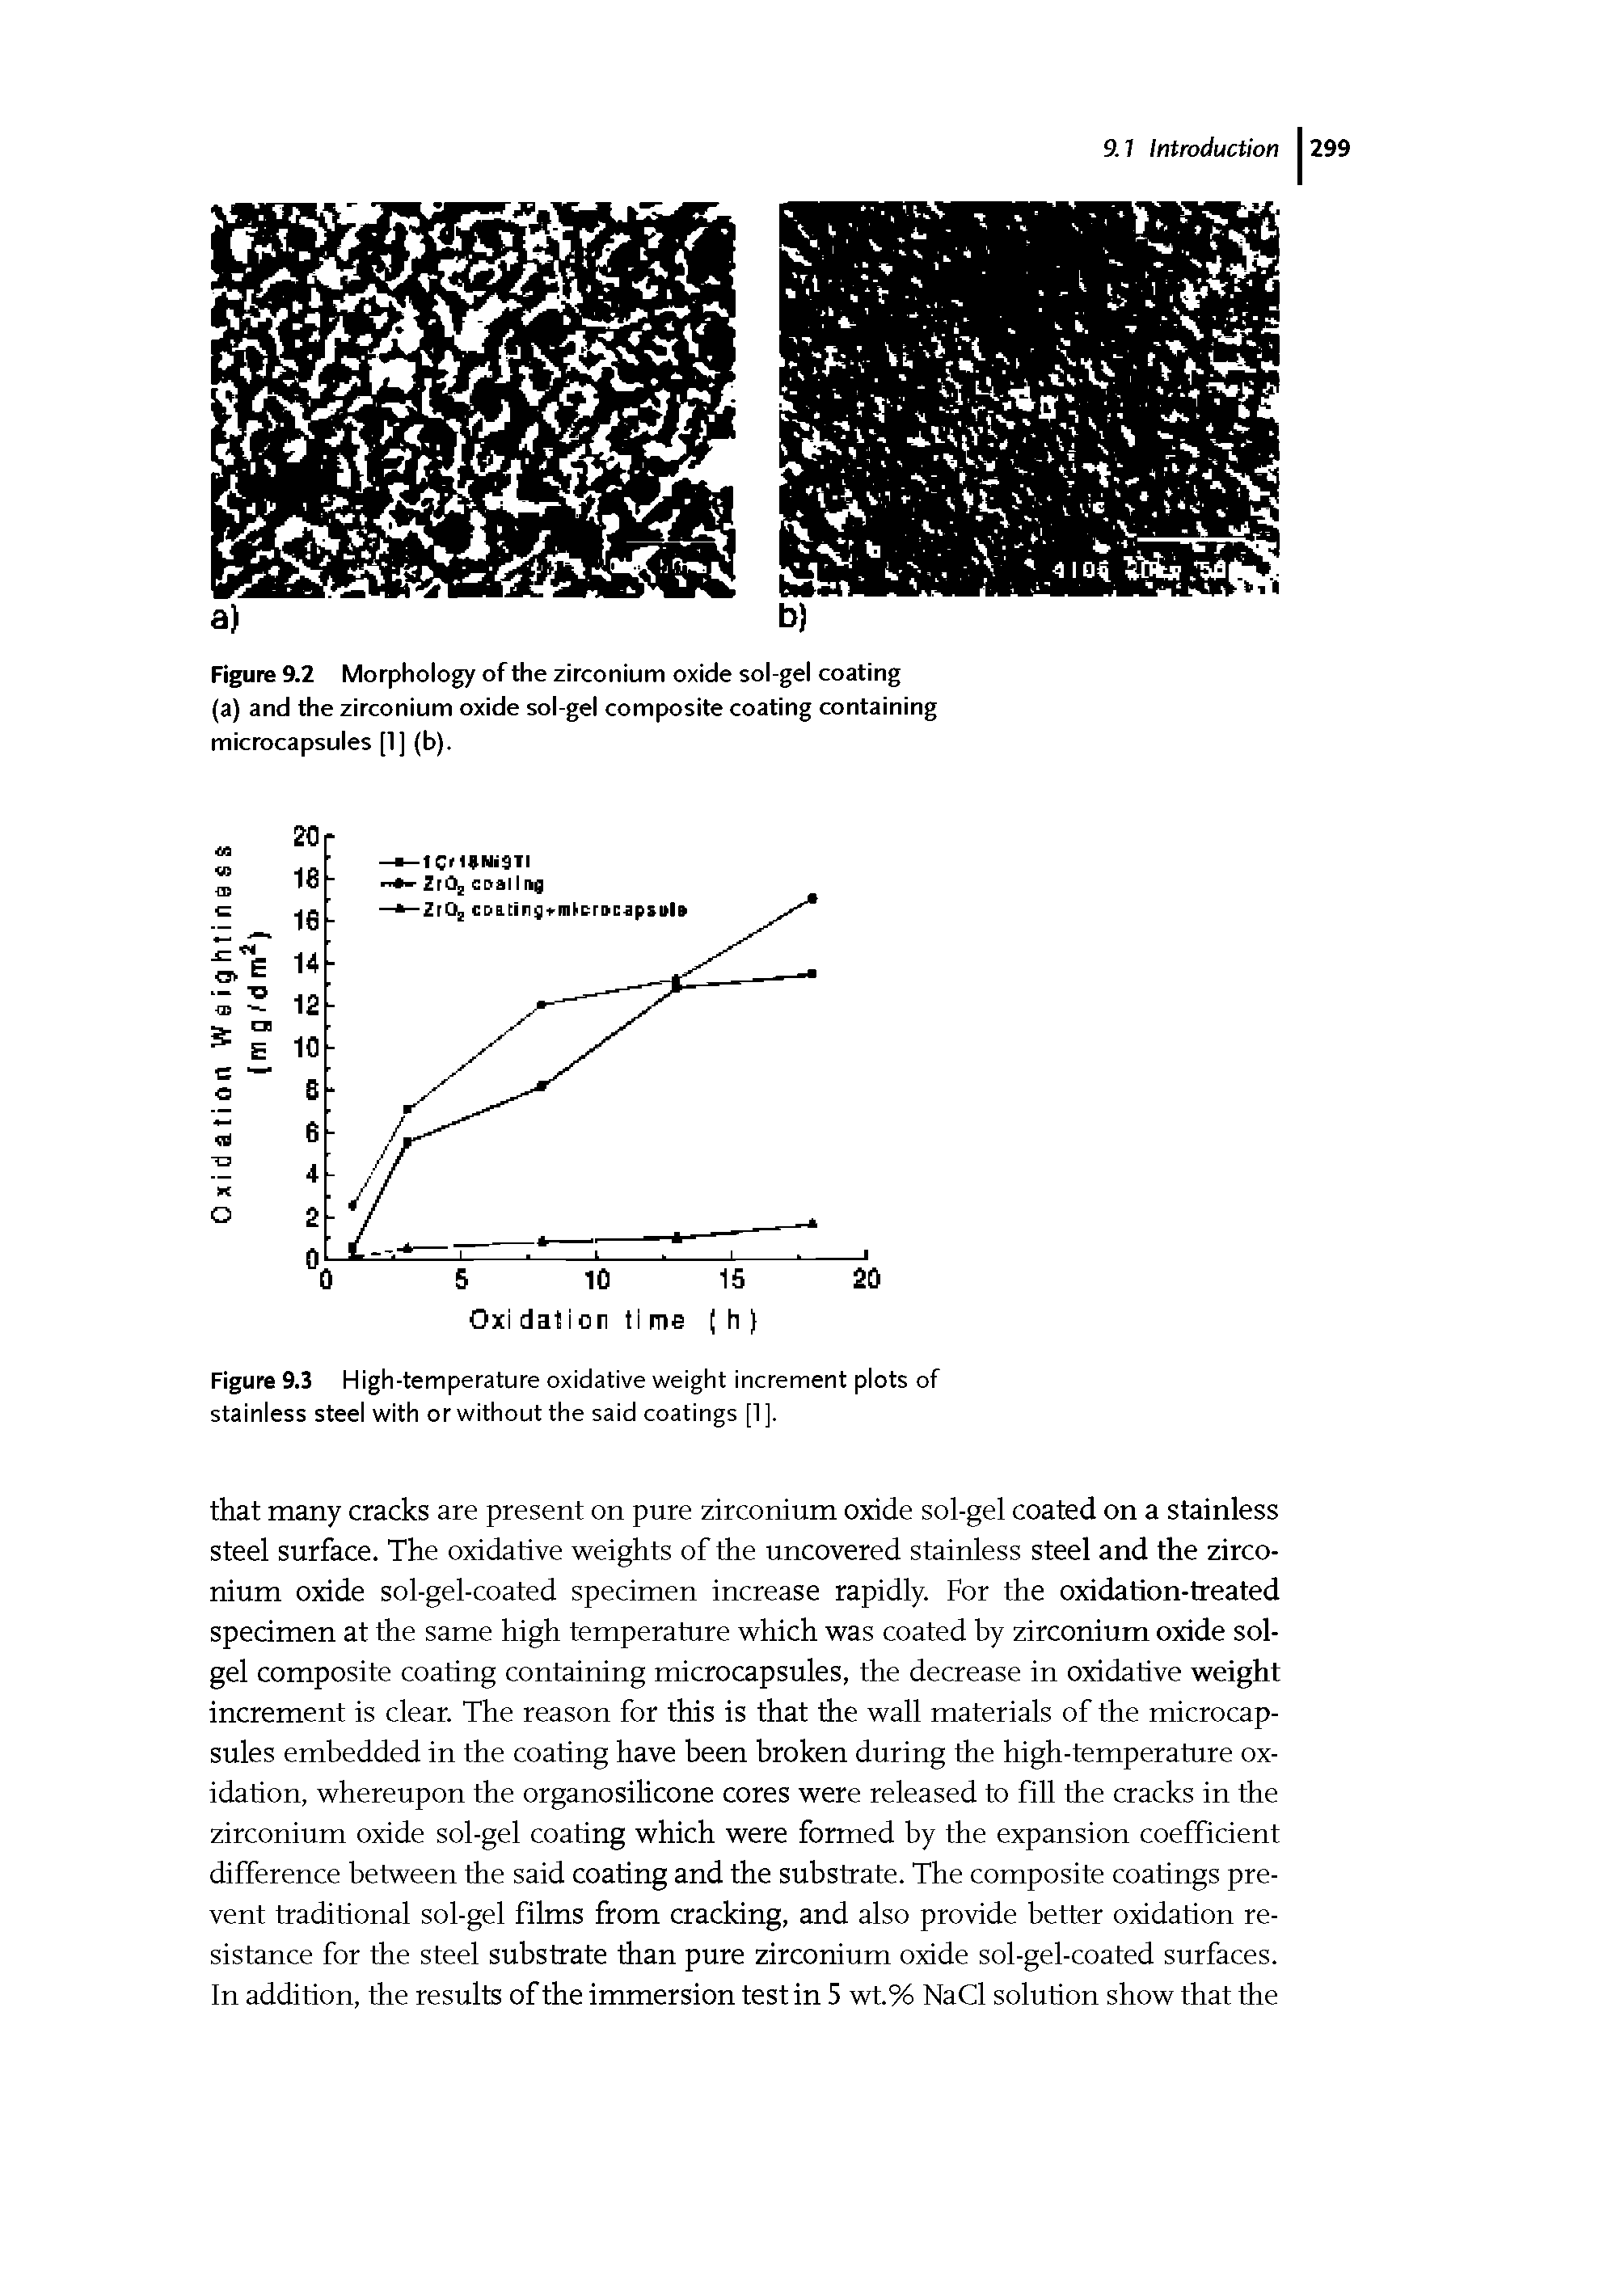 Figure 9.3 High-temperature oxidative weight increment plots of stainless steel with or without the said coatings [1 ].